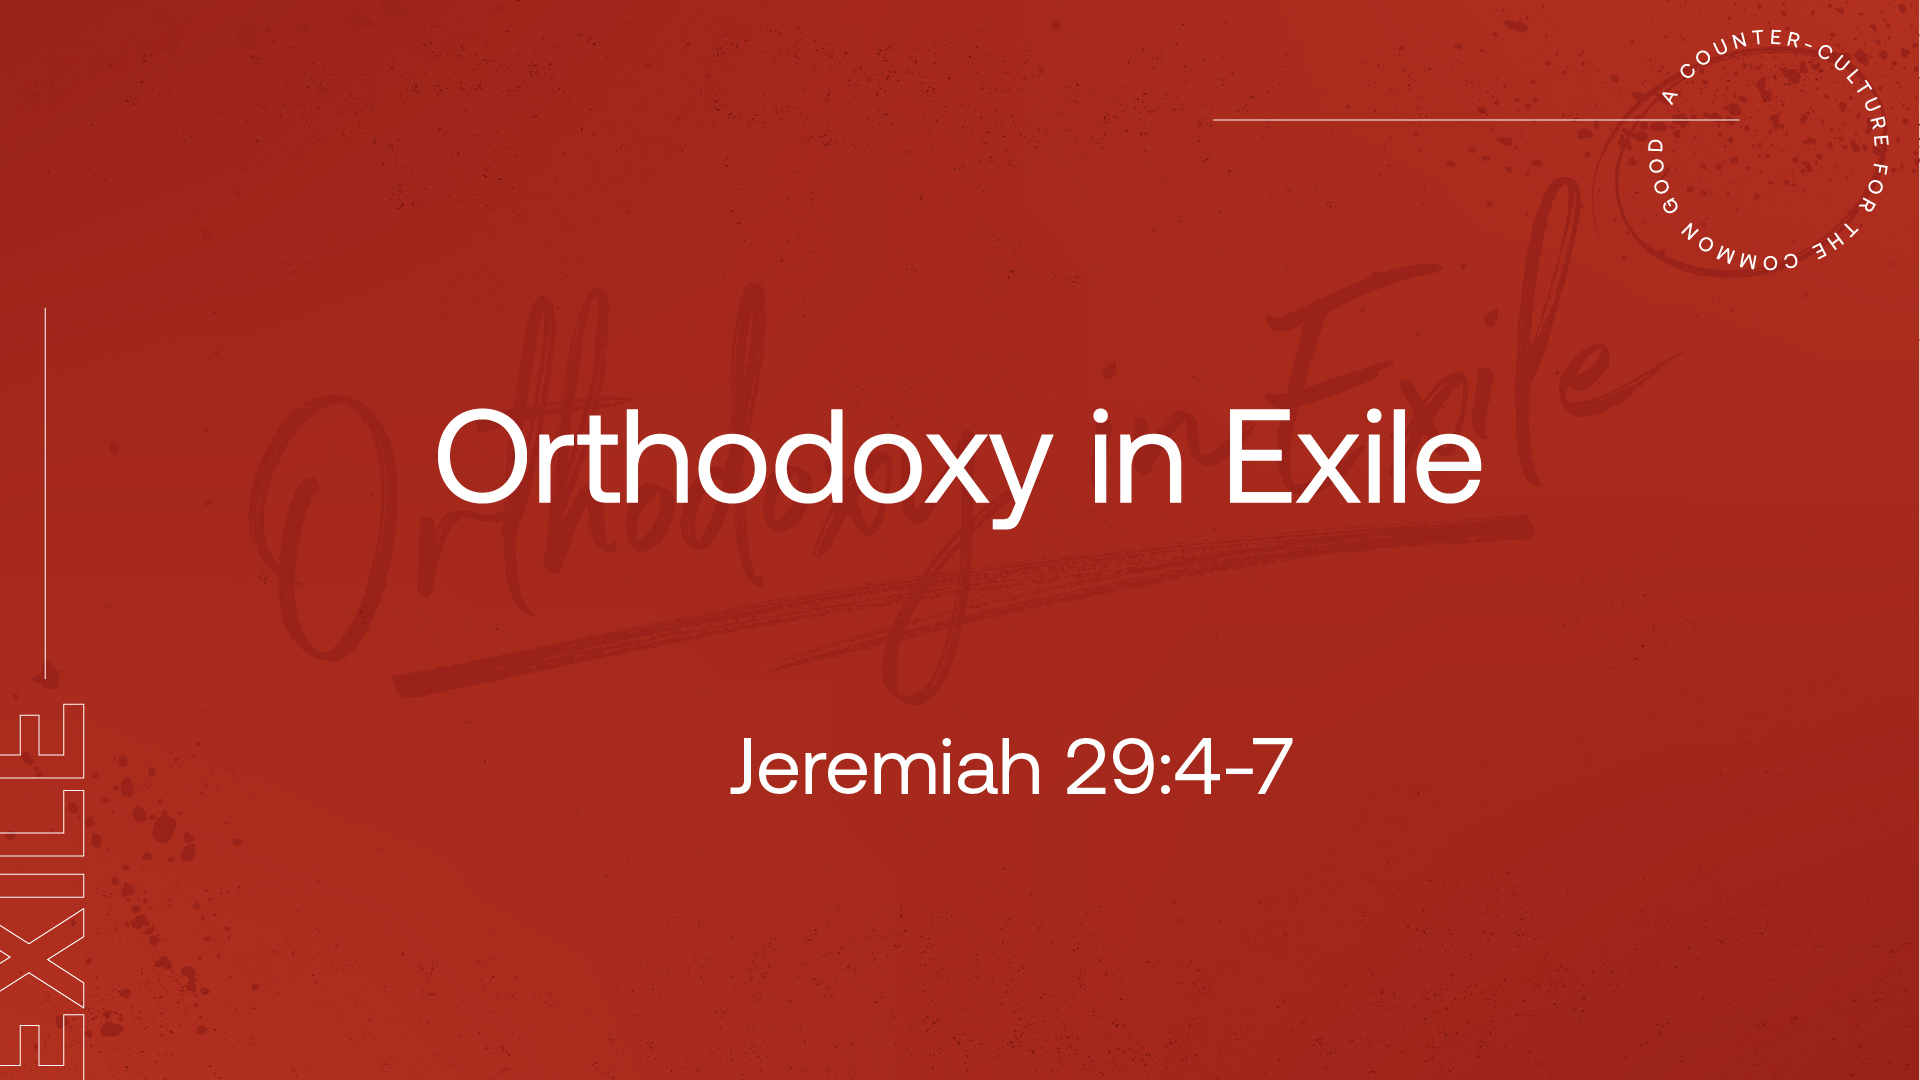 Orthodoxy in Exile